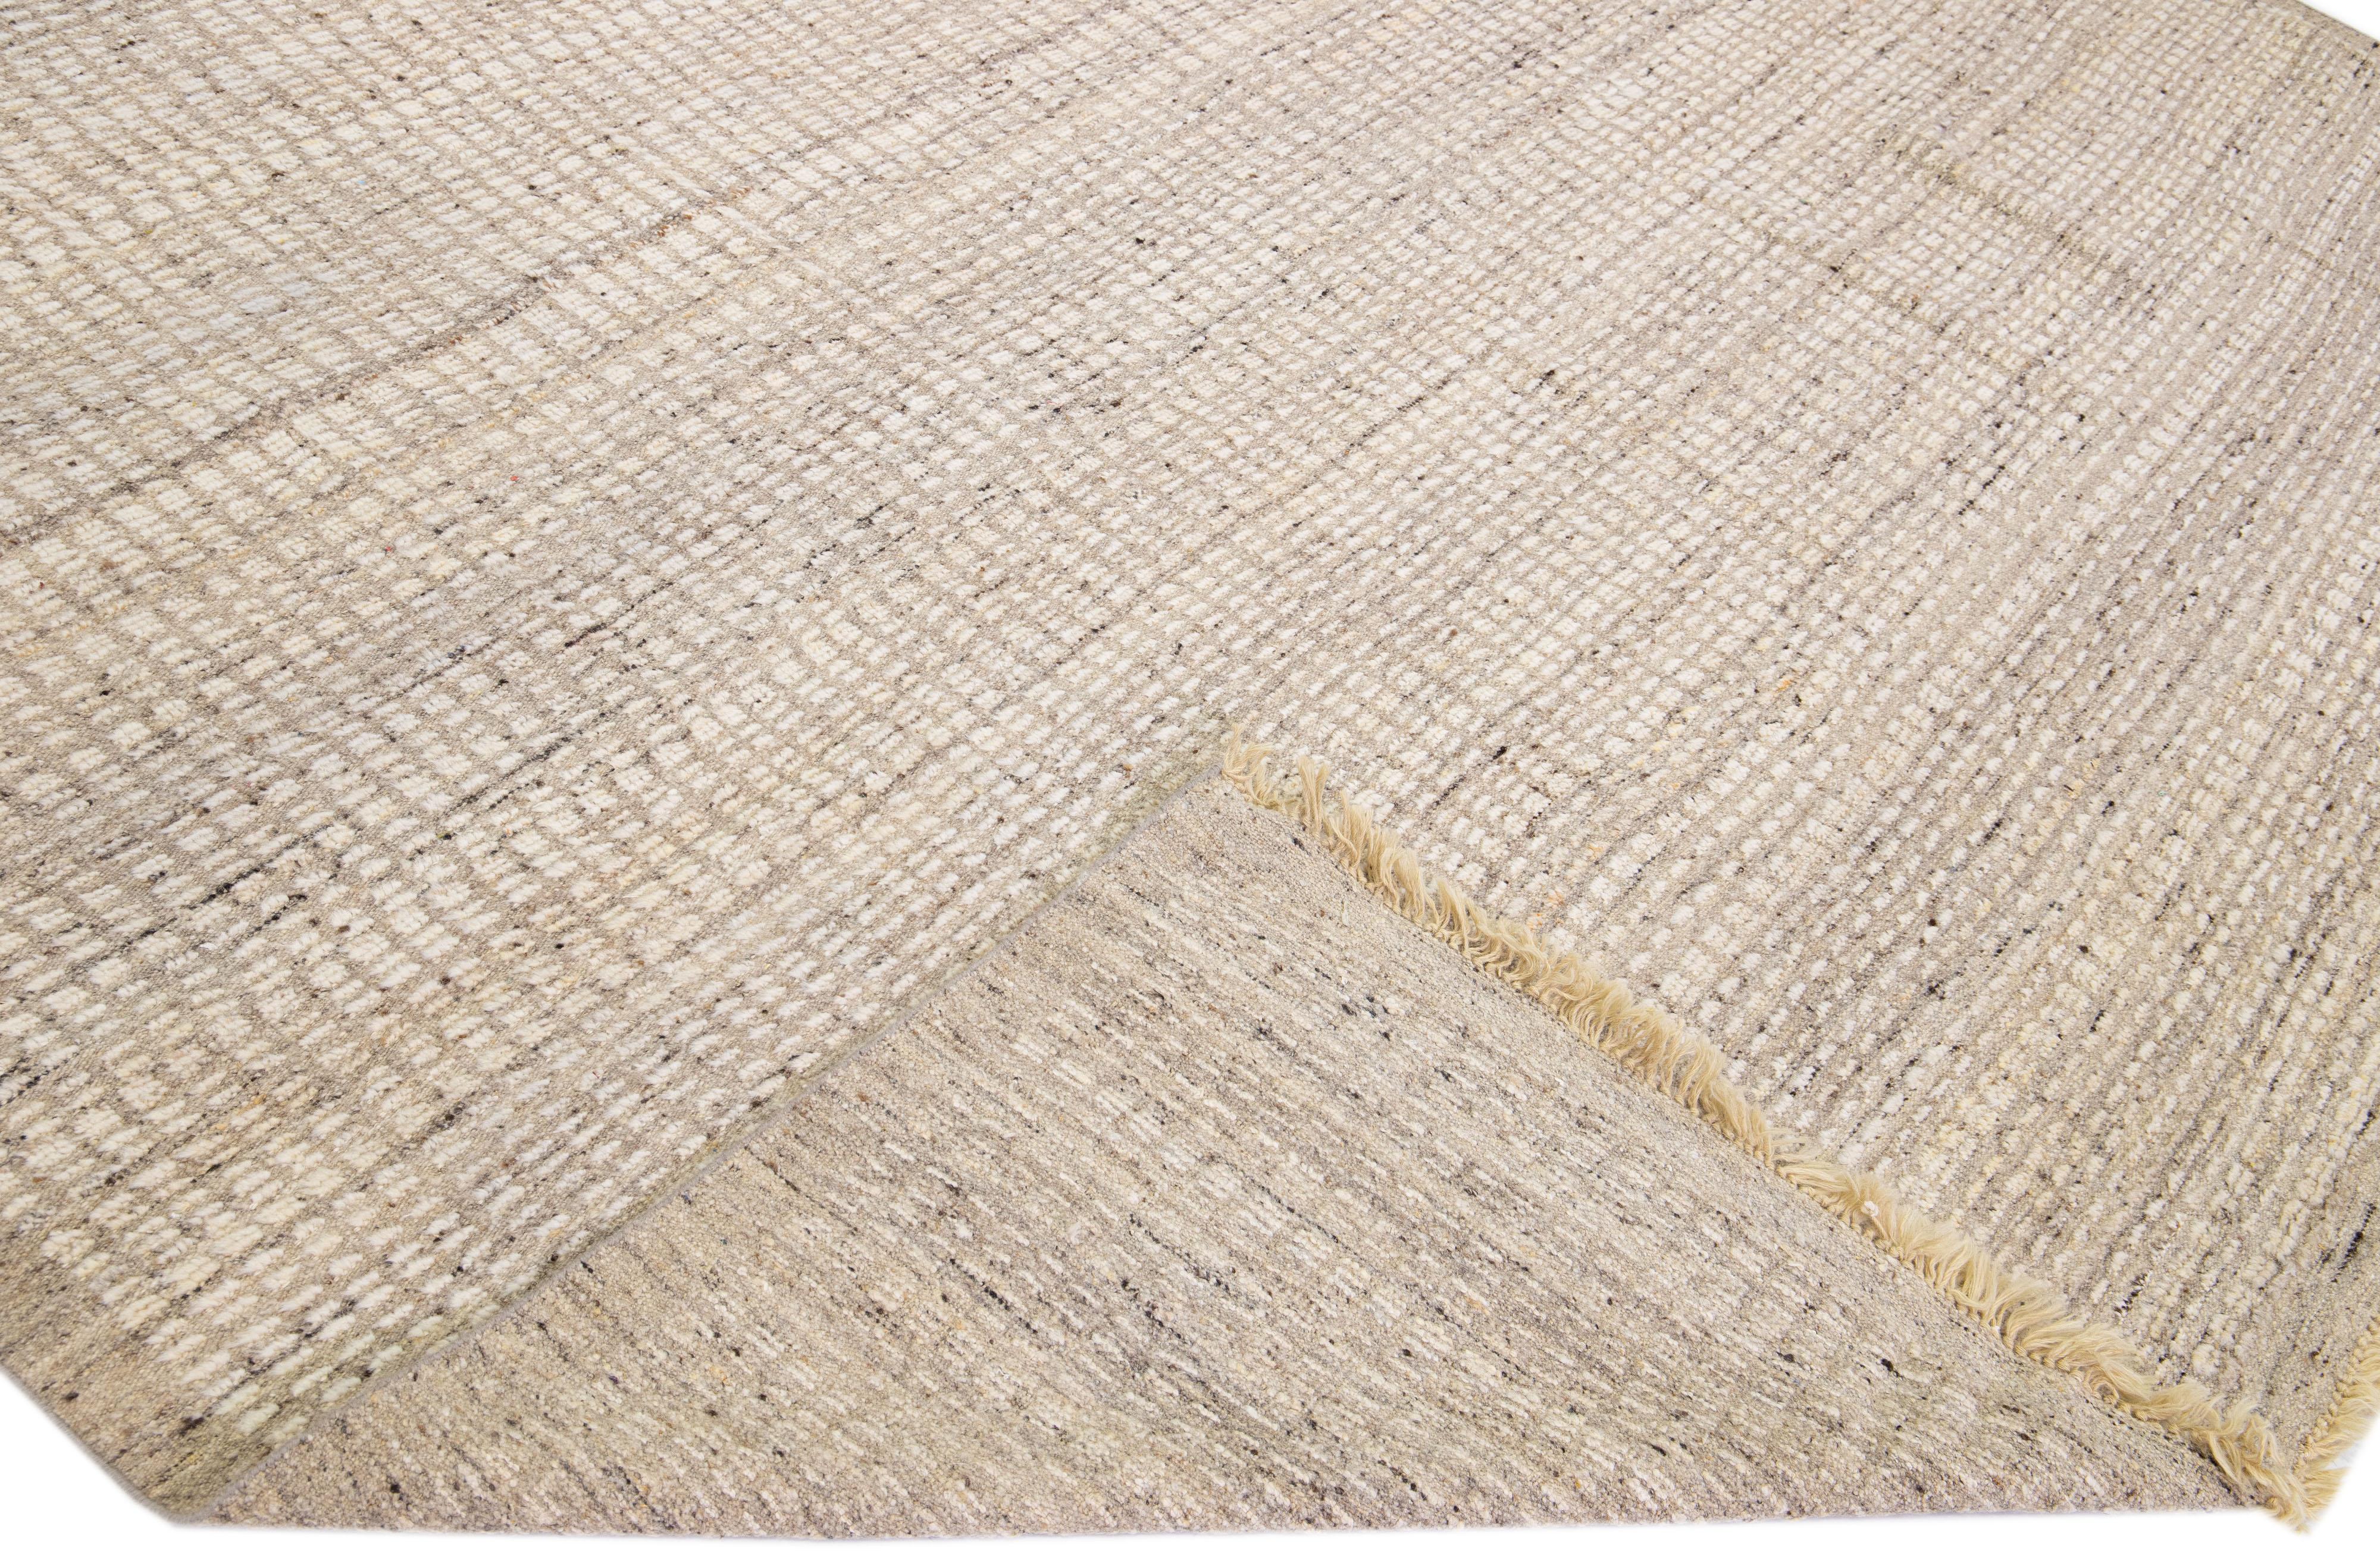 Beautiful modern Moroccan style hand-knotted wool rug with a beige and light brown field. This piece has a gorgeous subtle geometric pattern design with fringes on the top and bottom end.

This rug measures: 10'3